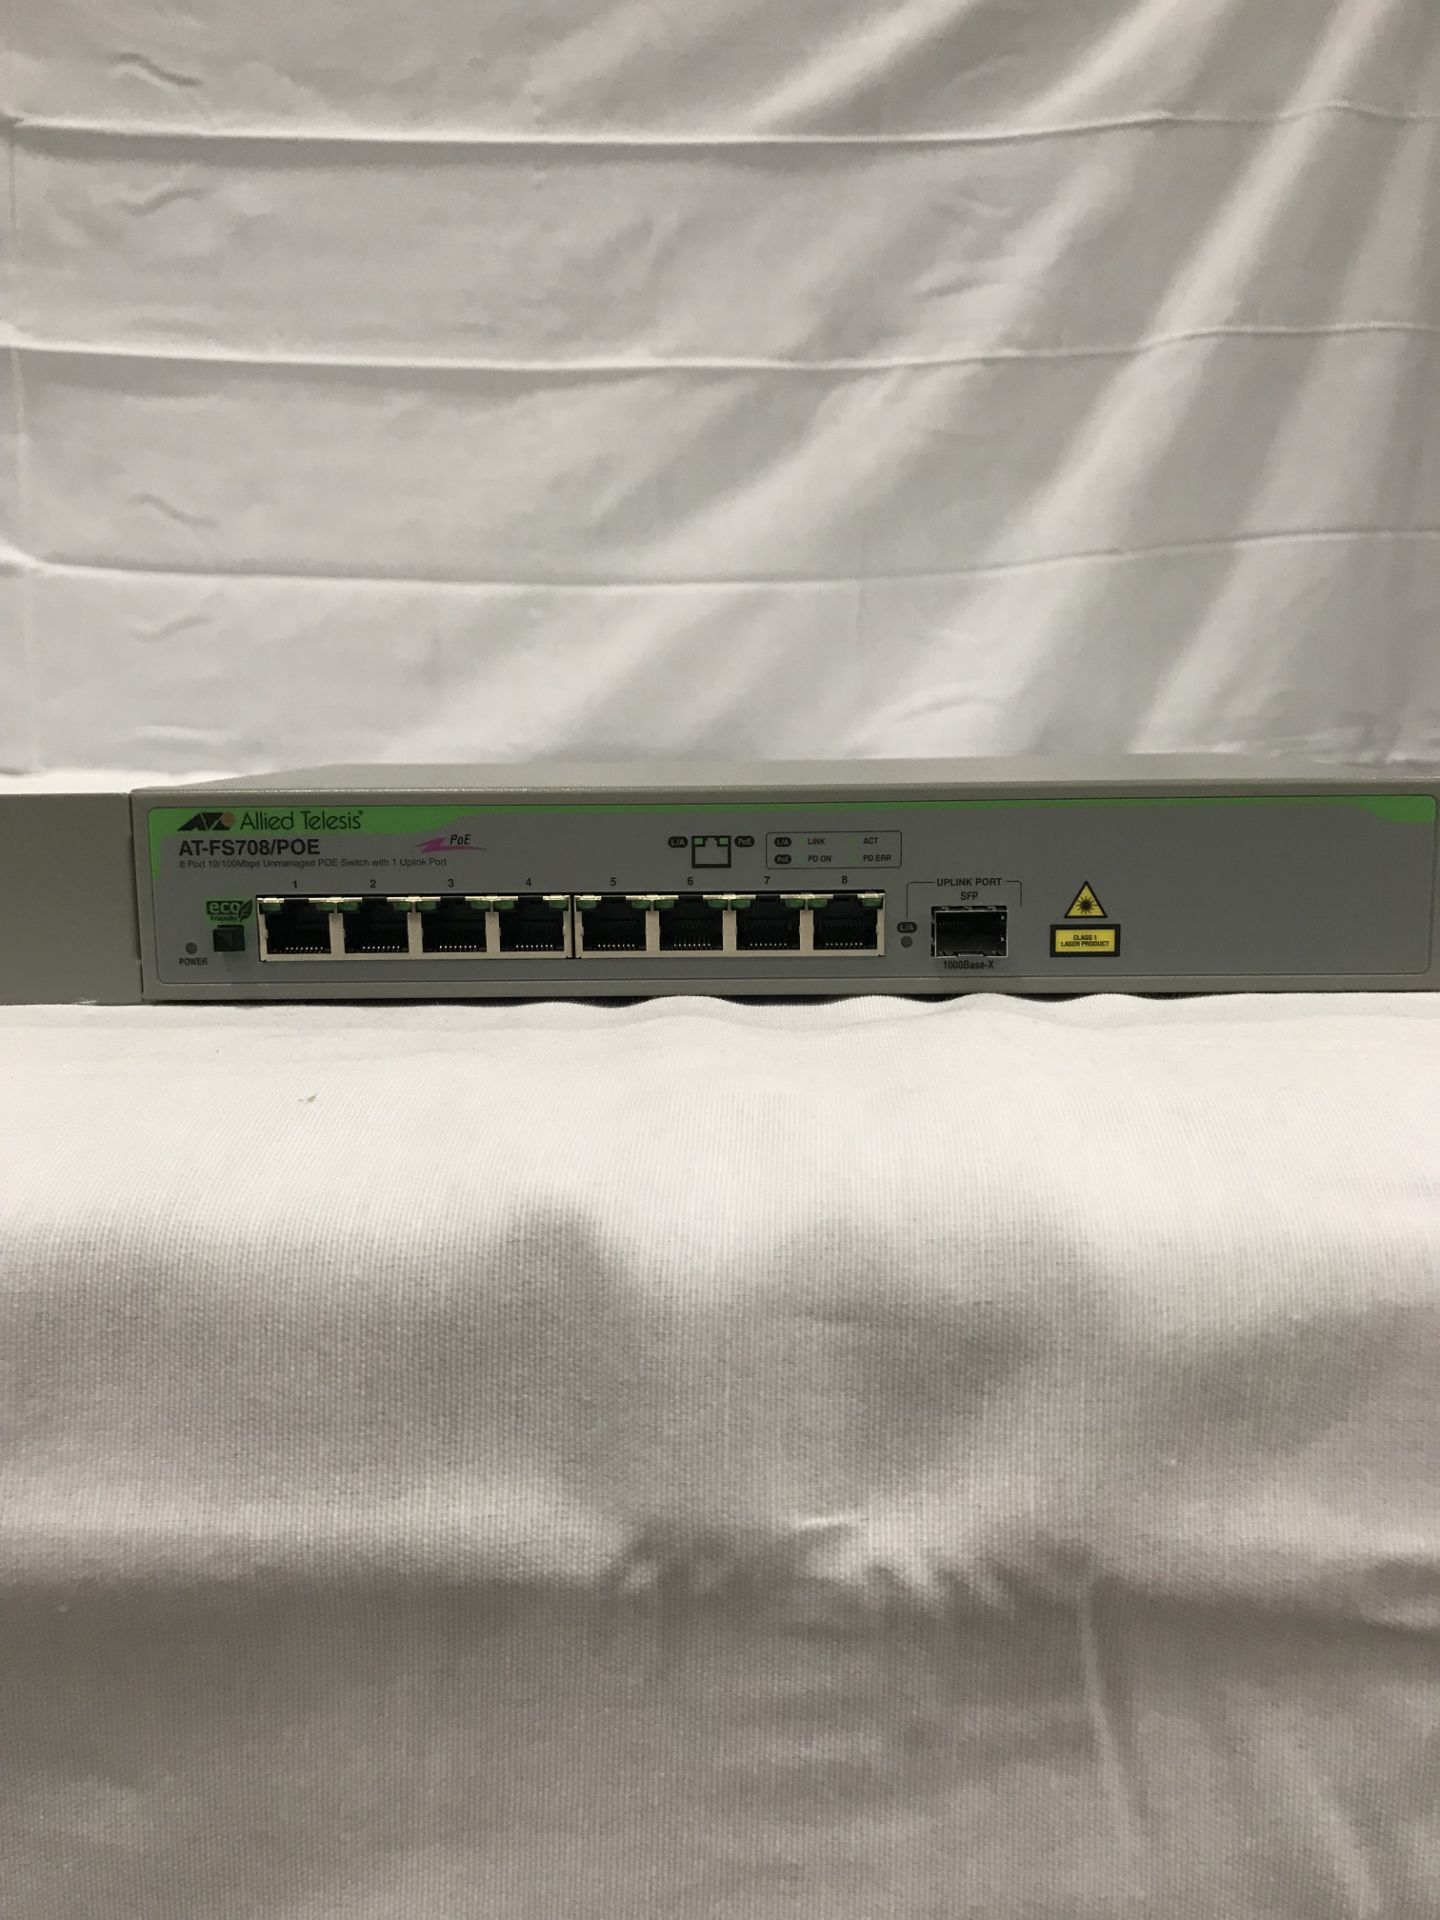 Allied-Telesis AT-FS708 POE Network Switch